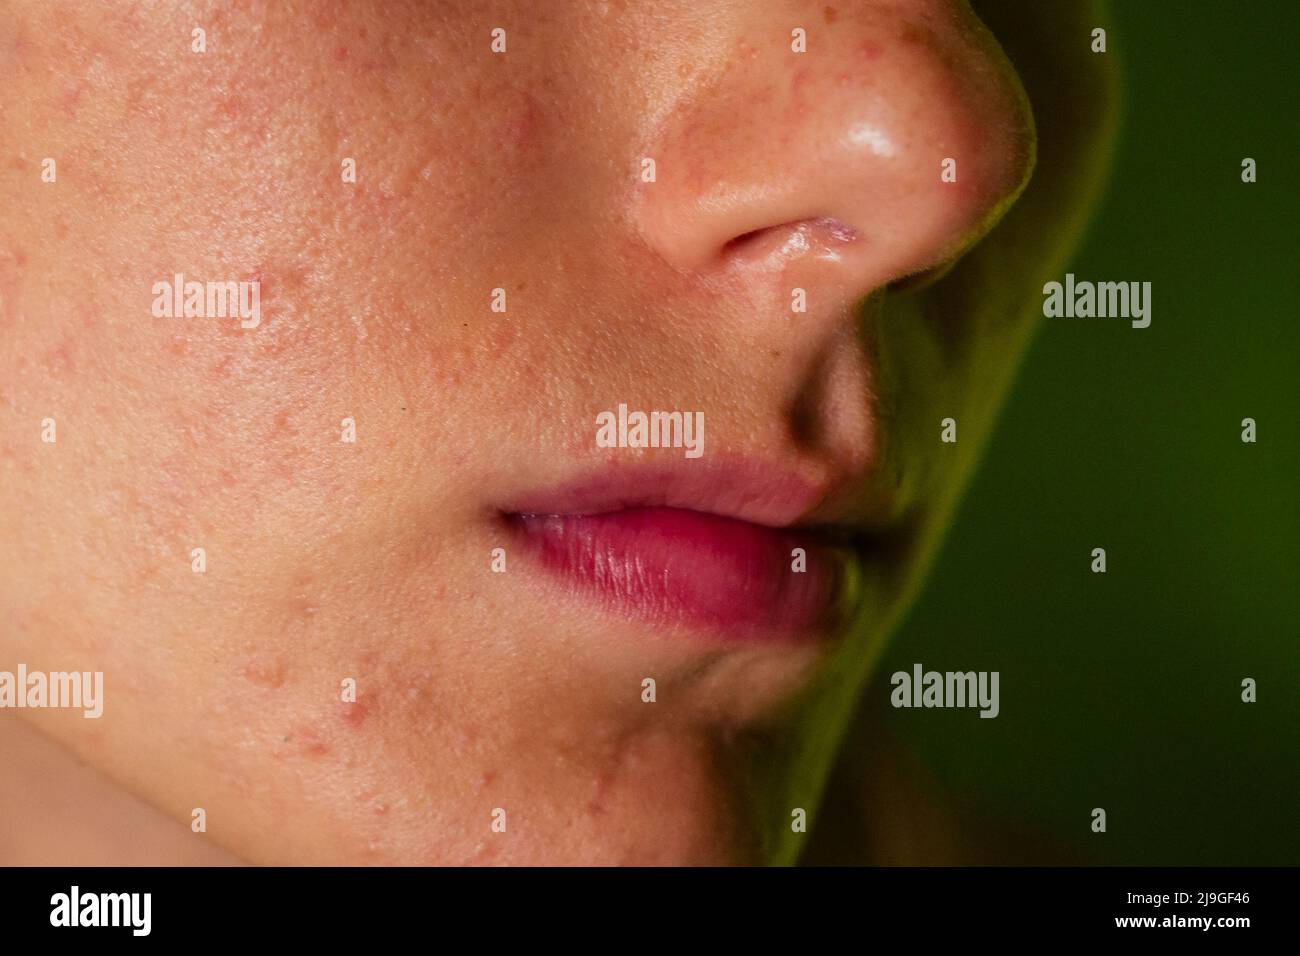 post-acne, scars and red festering pimples on the face of a young woman. concept of skin problems and harmonic failure Stock Photo